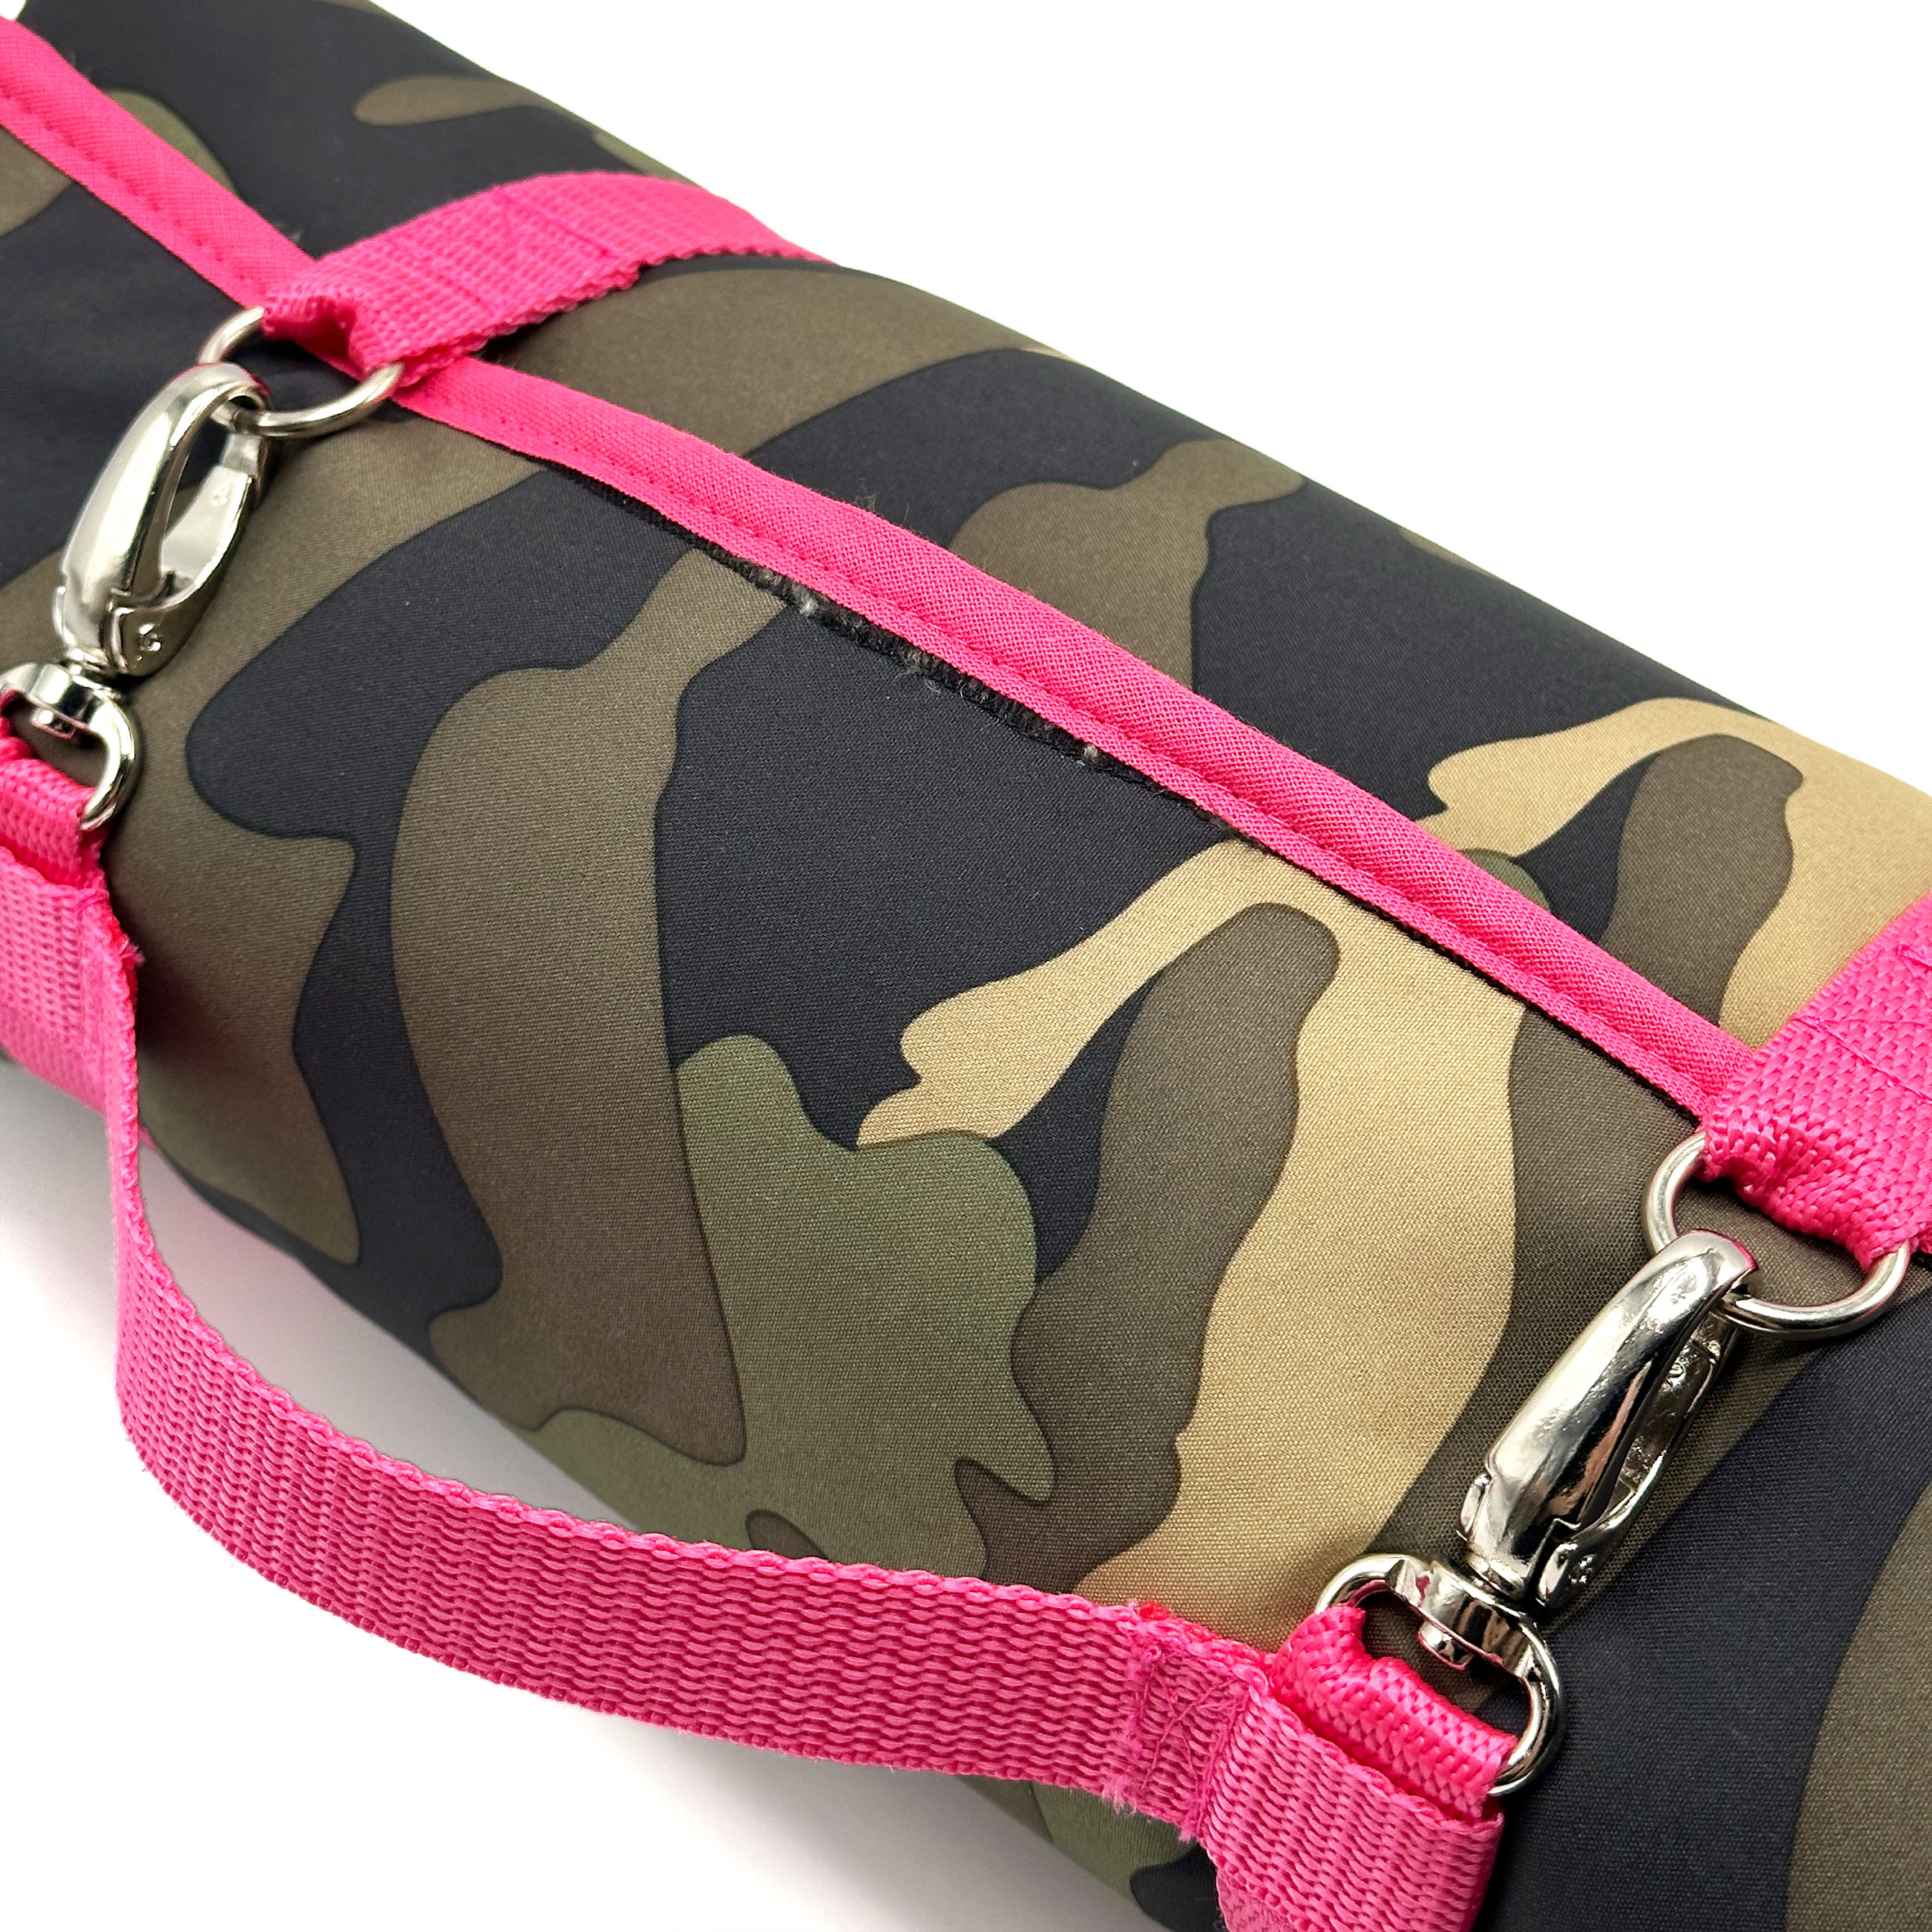  Special Price ★ Dog'n'Roll ★ Camouflage - Pink